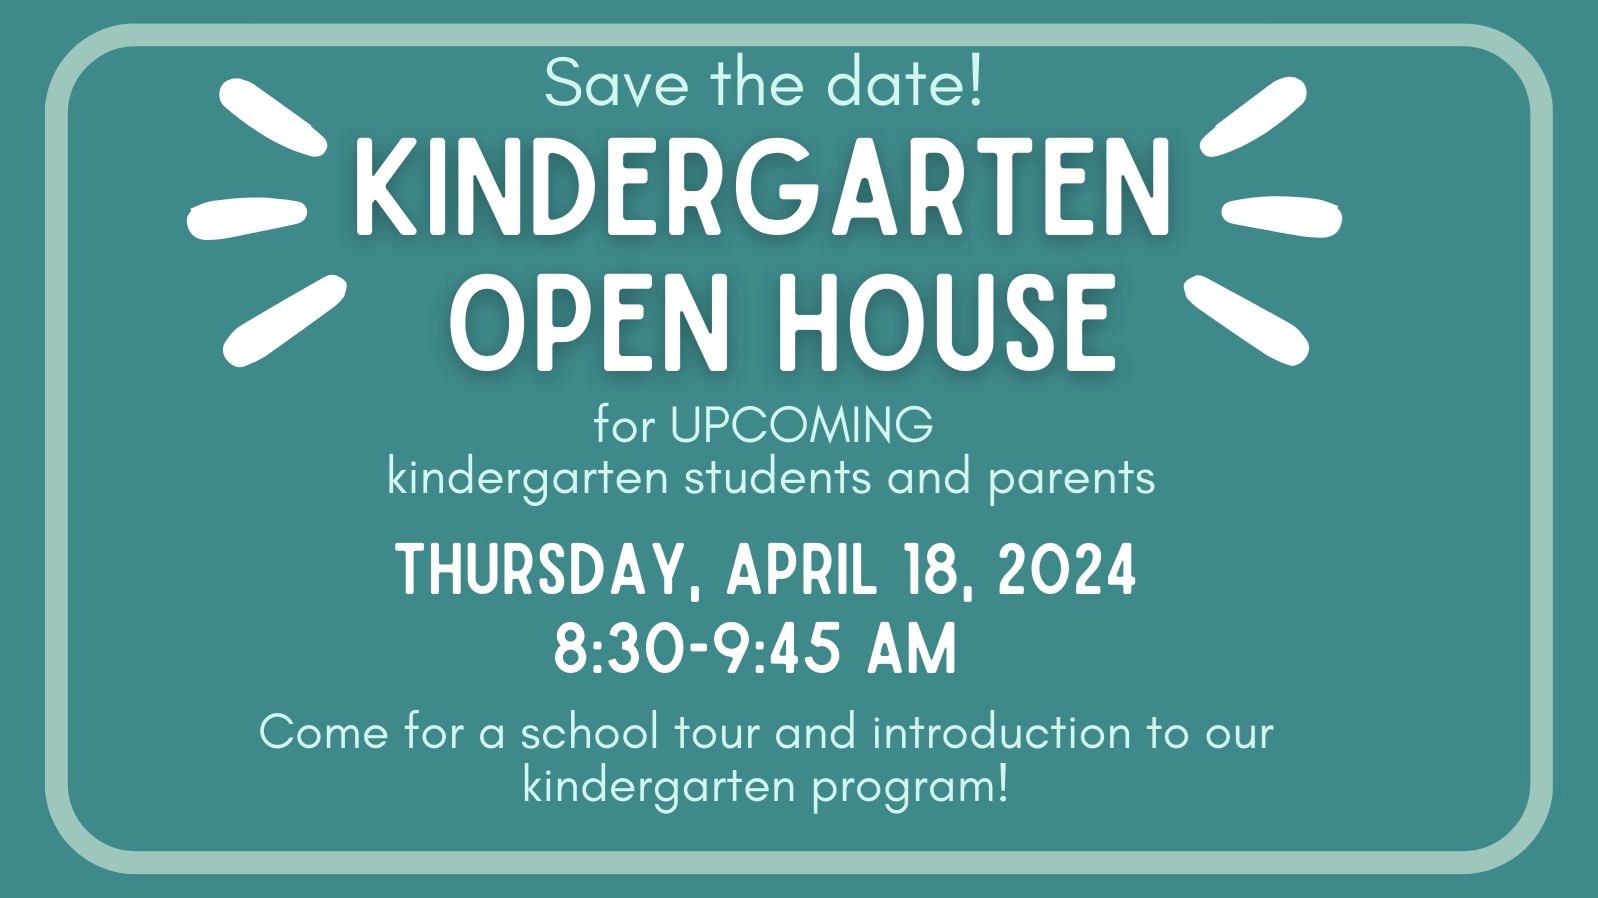 Save the date! Kindergarten Open House for upcoming kindergarten students and parents. Thursday, April 18, 2024, 8:30 through 9:45 am. 